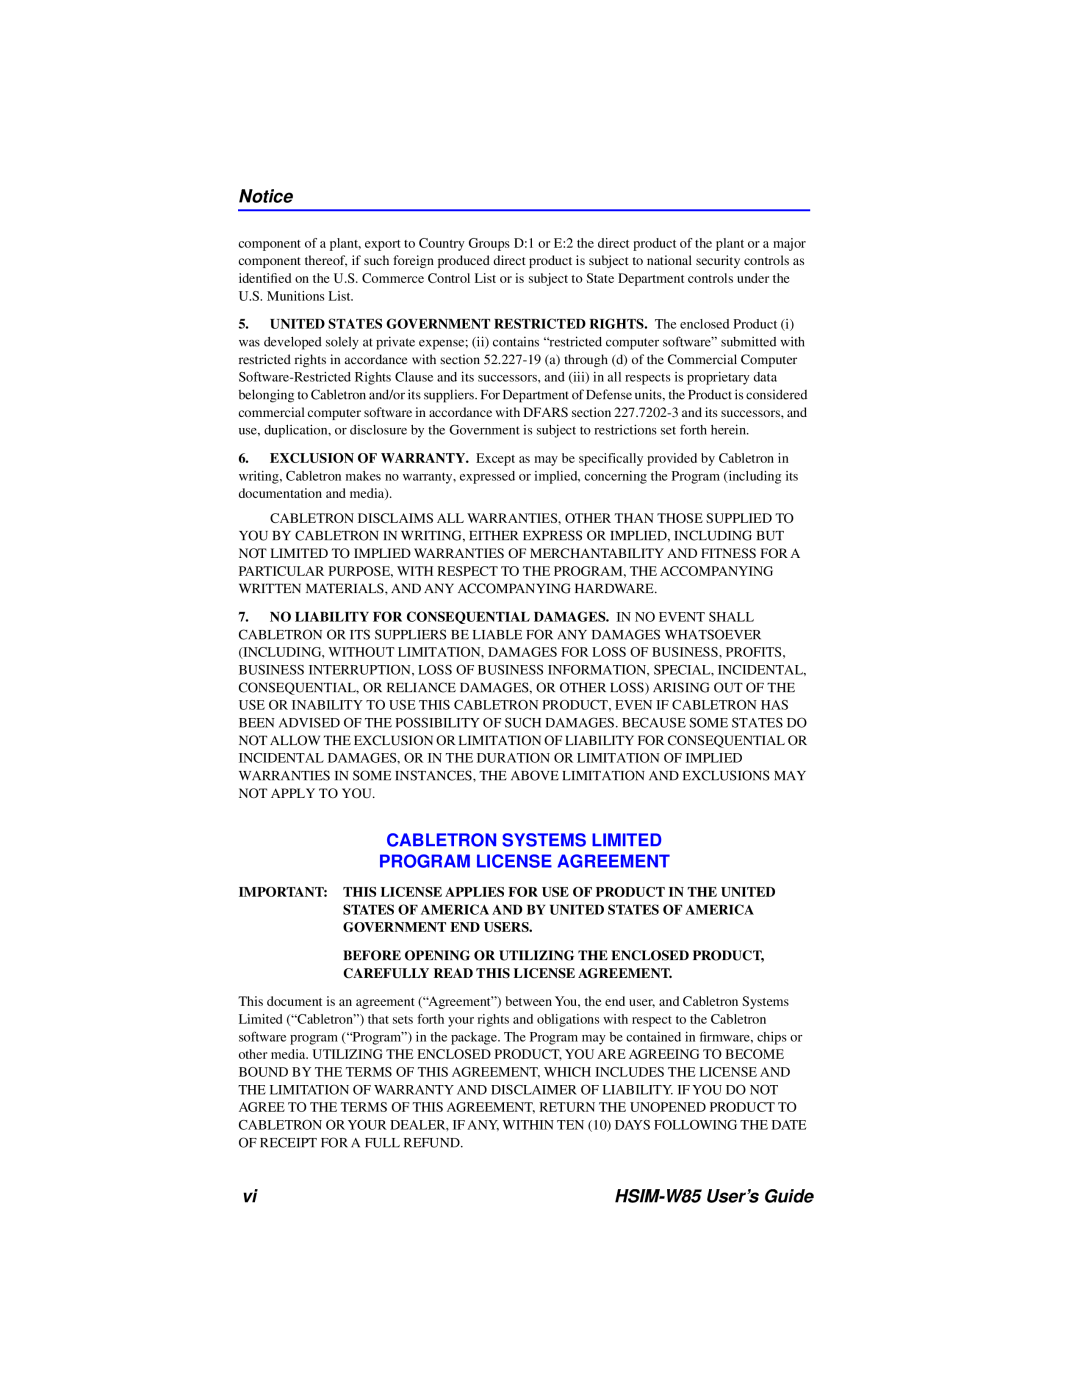 Cabletron Systems manual Cabletron Systems Limited Program License Agreement, HSIM-W85 User’s Guide 